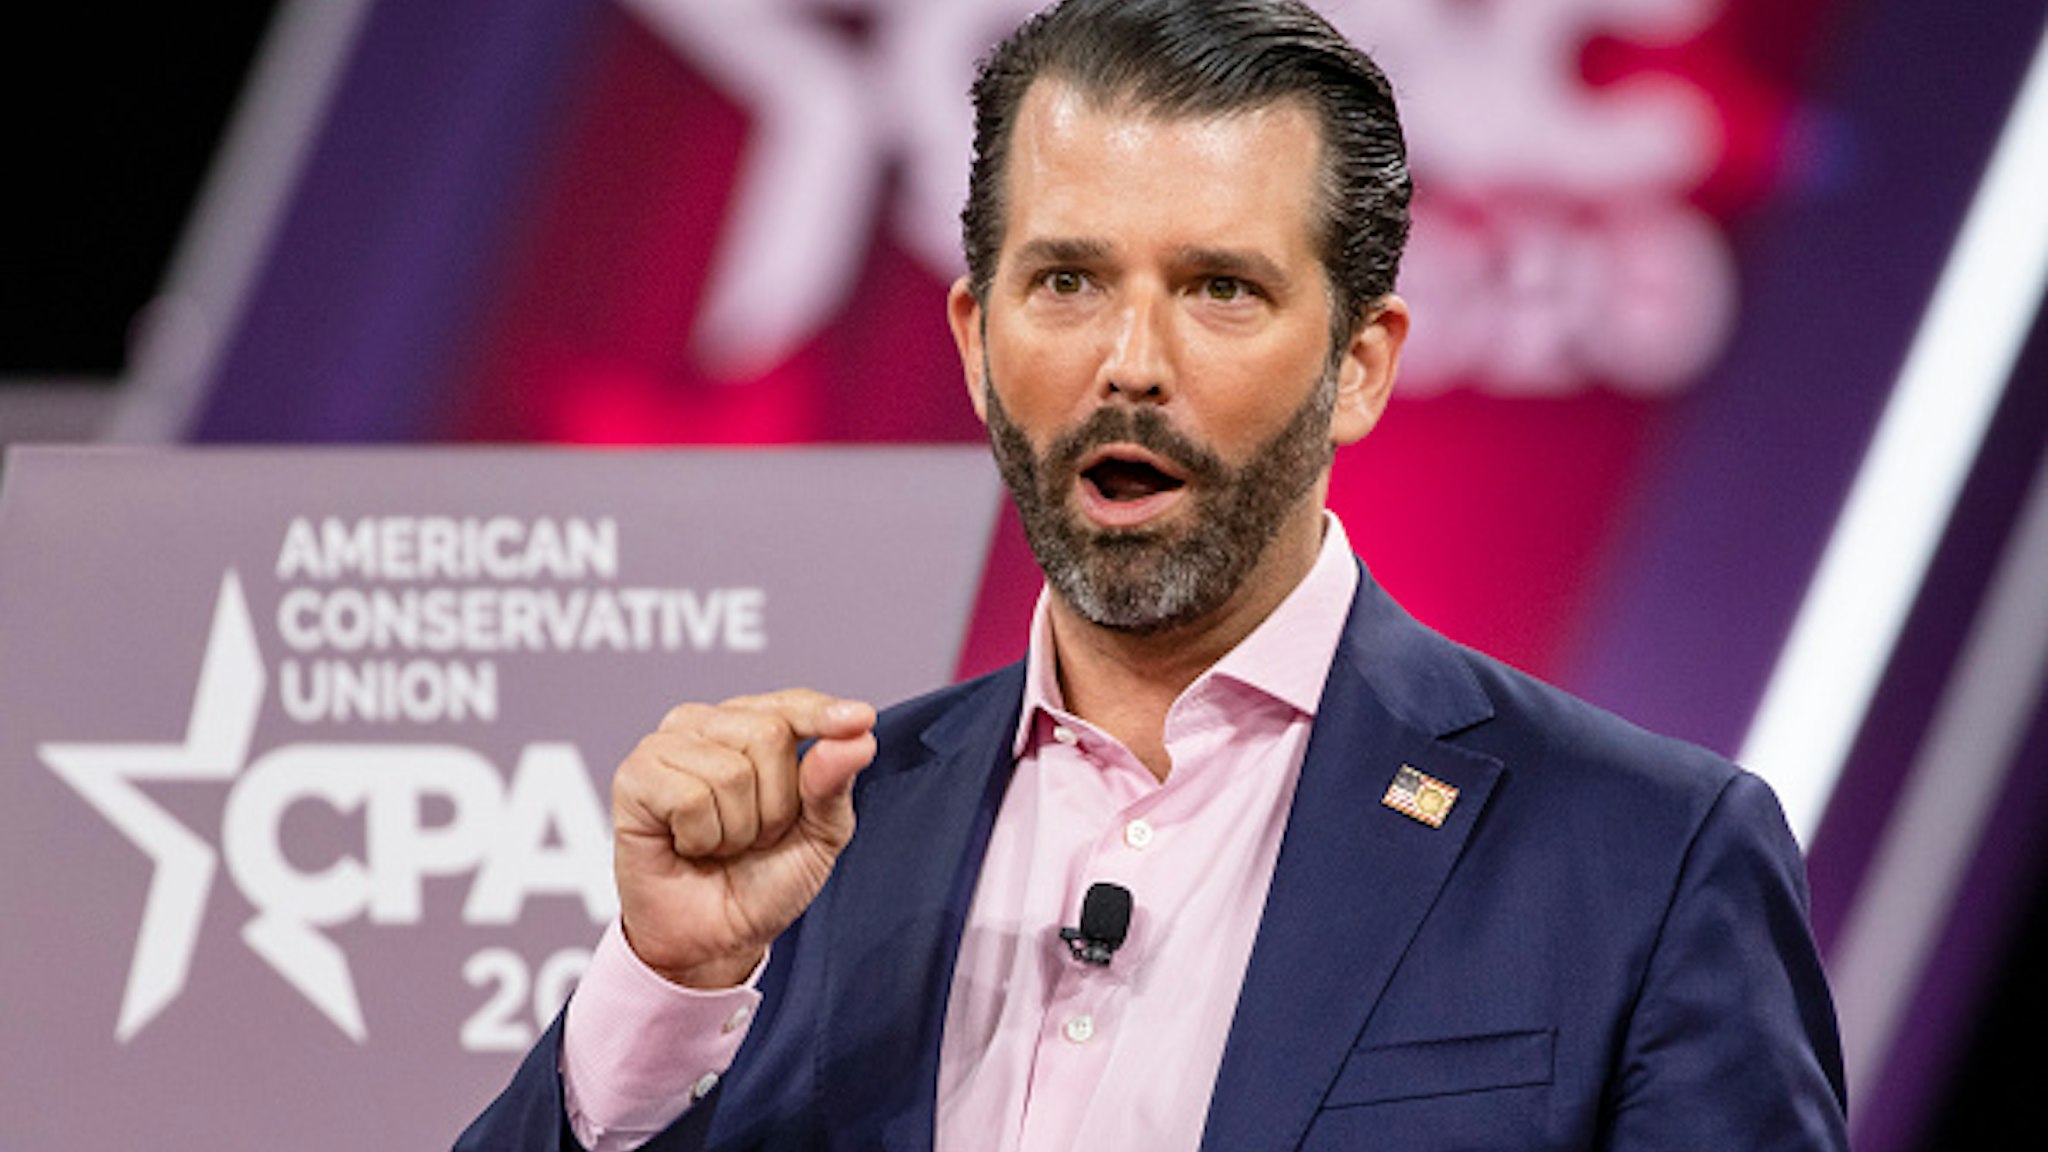 NATIONAL HARBOR, MD - FEBRUARY 28: Donald Trump Jr., son of President Donald Trump, speaks on stage during the Conservative Political Action Conference 2020 (CPAC) hosted by the American Conservative Union on February 28, 2020 in National Harbor, MD.